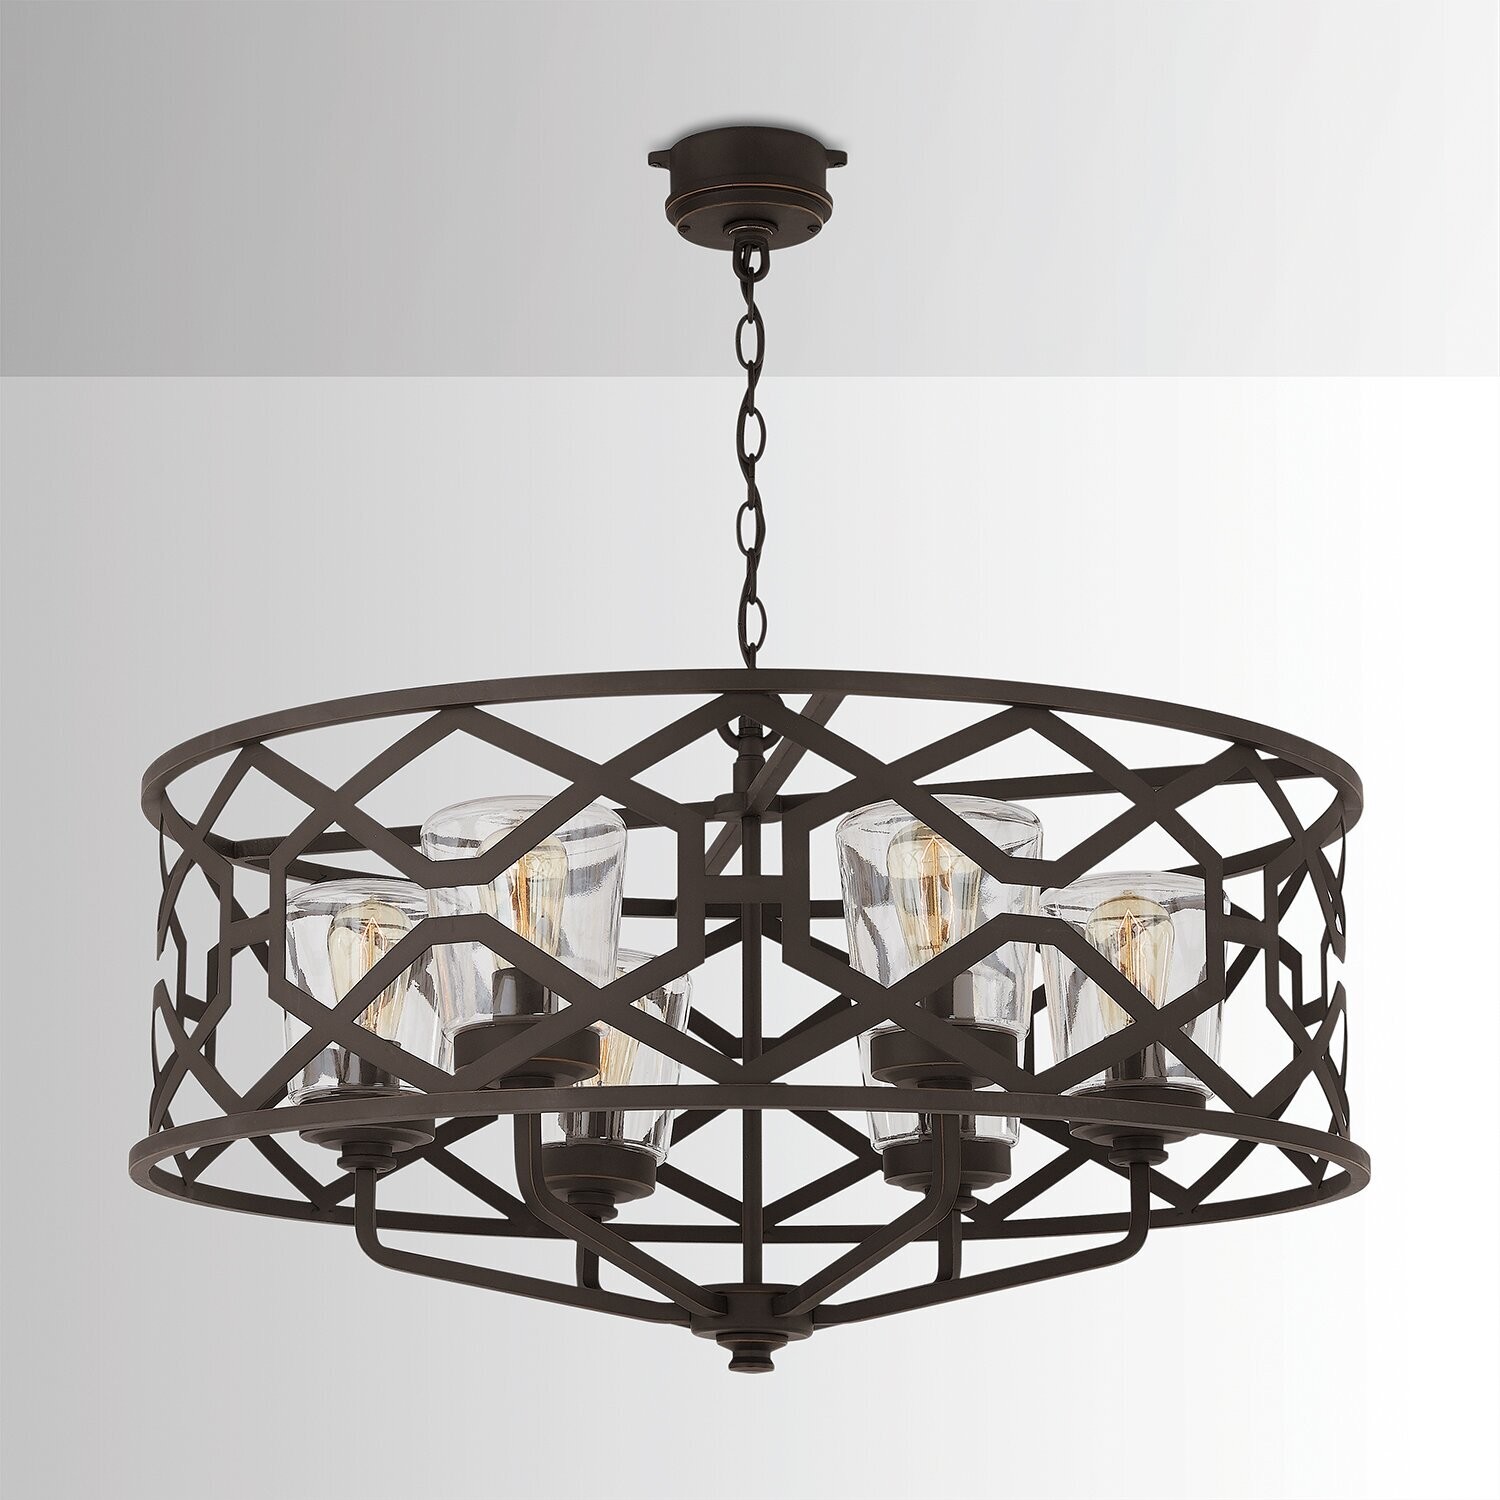 Extra large outdoor chandelier